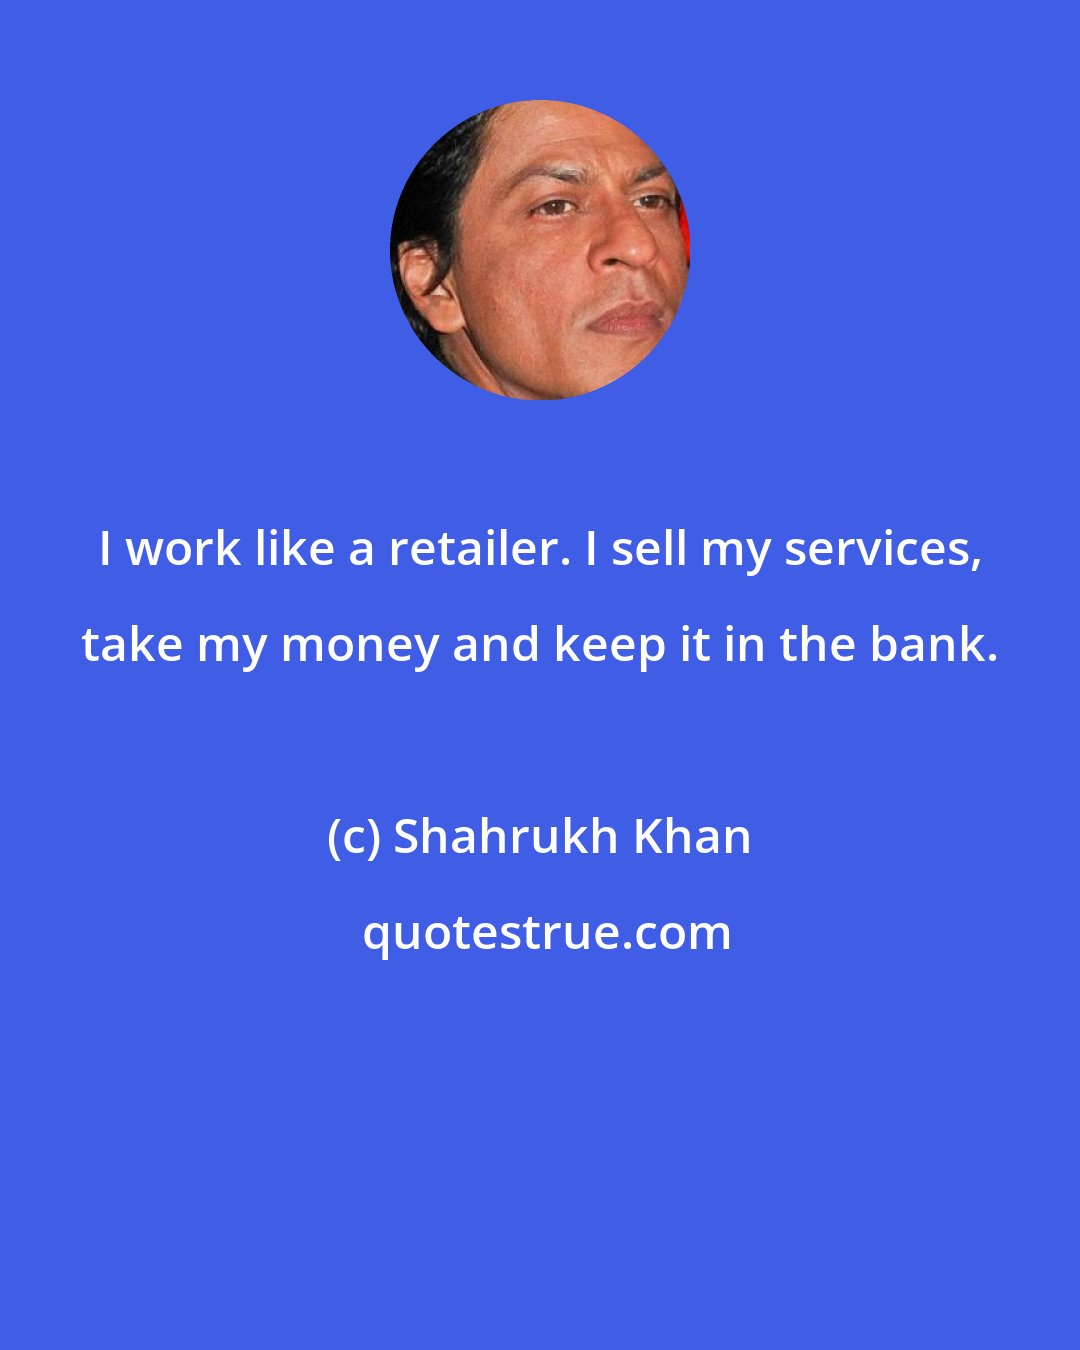 Shahrukh Khan: I work like a retailer. I sell my services, take my money and keep it in the bank.